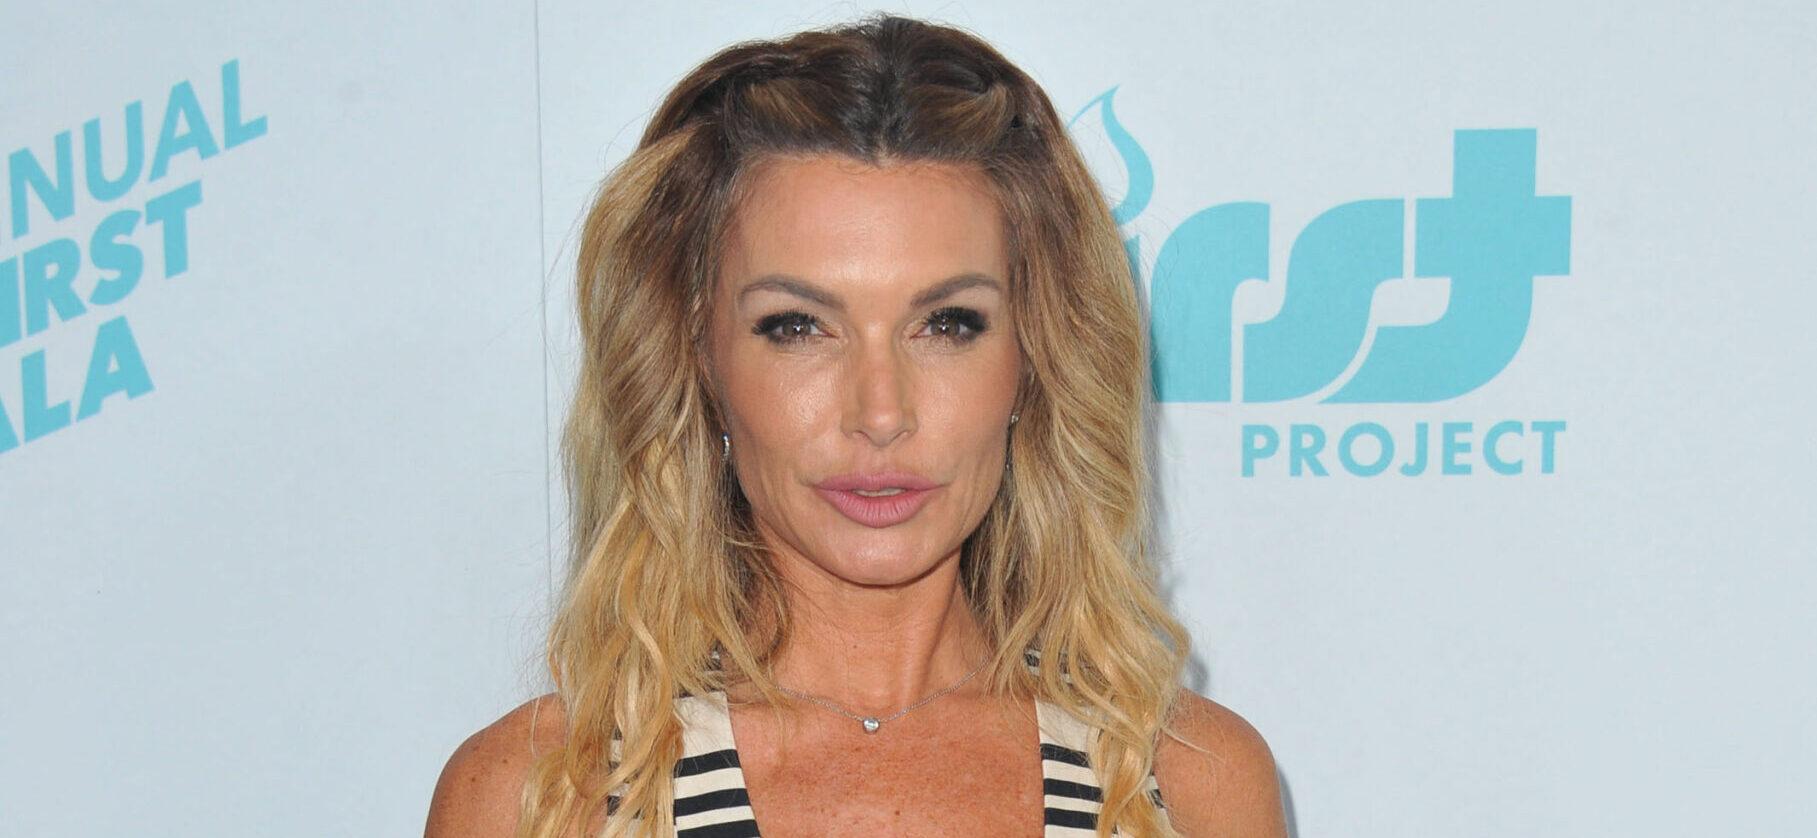 ‘RHOBH’ Star Eden Sassoon Sued Over Dog Attack Causing ‘Permanent Disability’